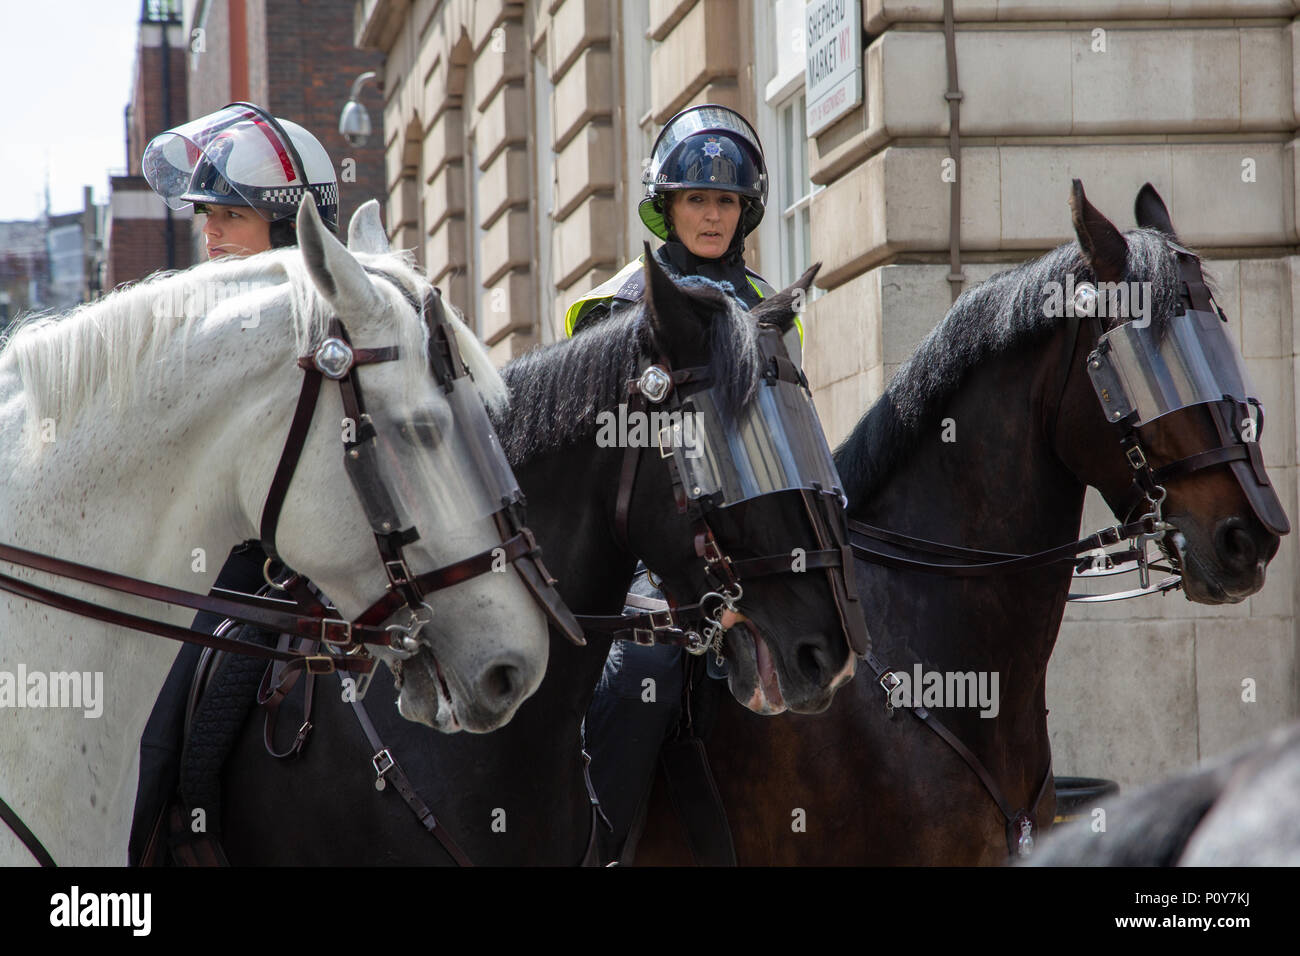 London, UK - 10 June 2018:  As women marched through London to celebrate the centenary of women getting the vote, nearby in Mayfair women were on the front line of an aggressive counter-demonstration as Free Tommy Robinson supporters abused Muslims on an Quds Day anti-Israeli demonstration. Credit: On Sight Photographic/Alamy Live News Stock Photo